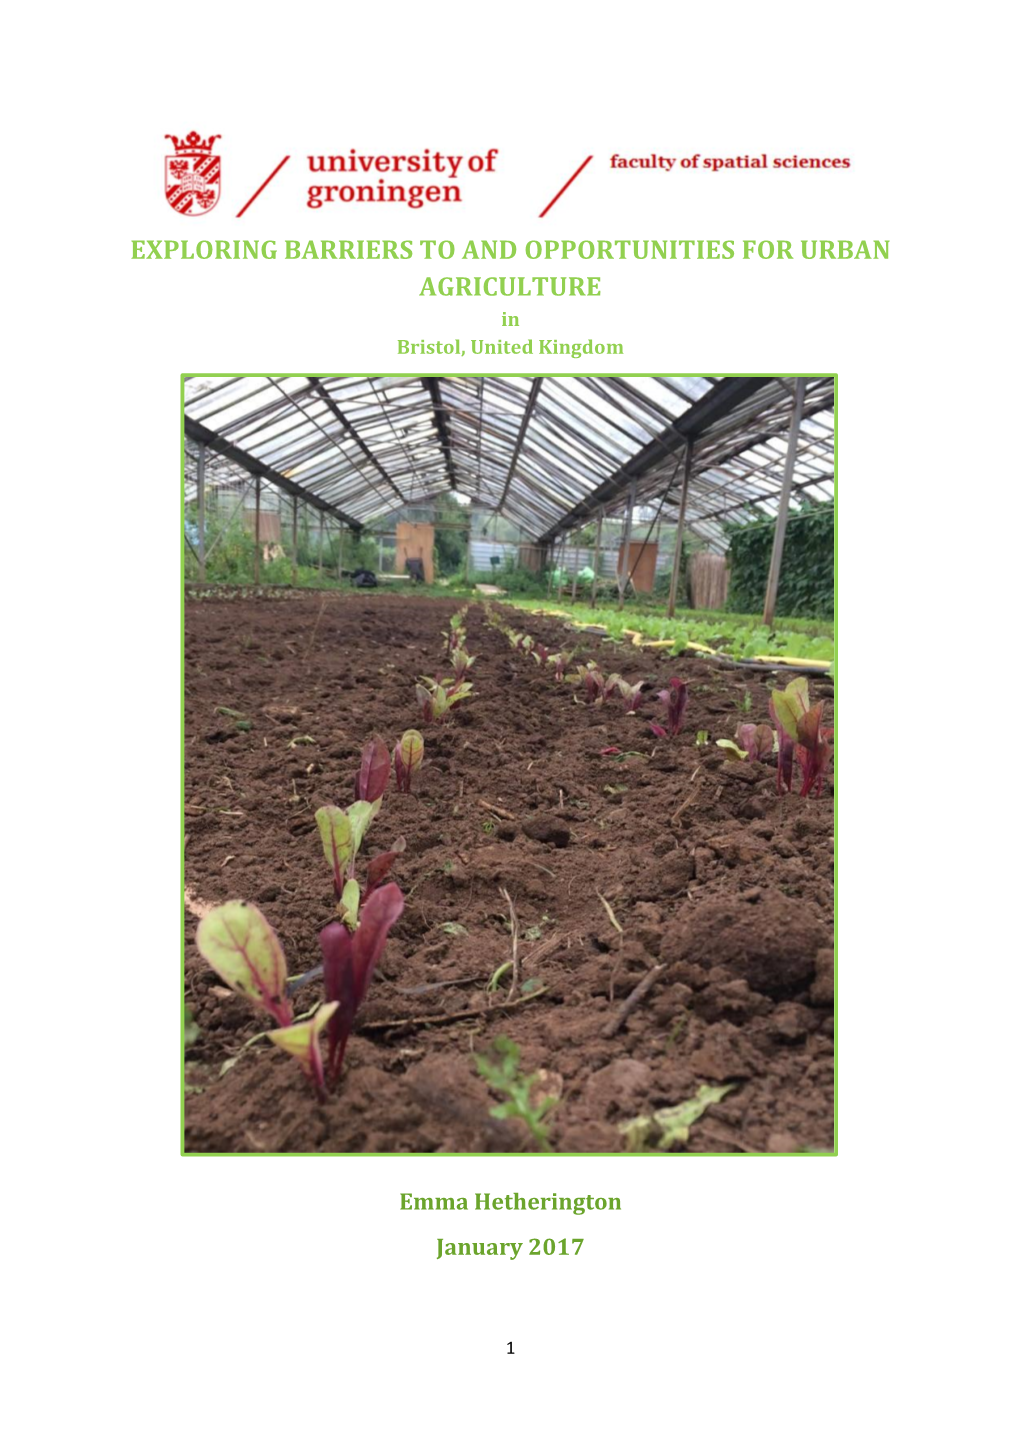 EXPLORING BARRIERS to and OPPORTUNITIES for URBAN AGRICULTURE in Bristol, United Kingdom